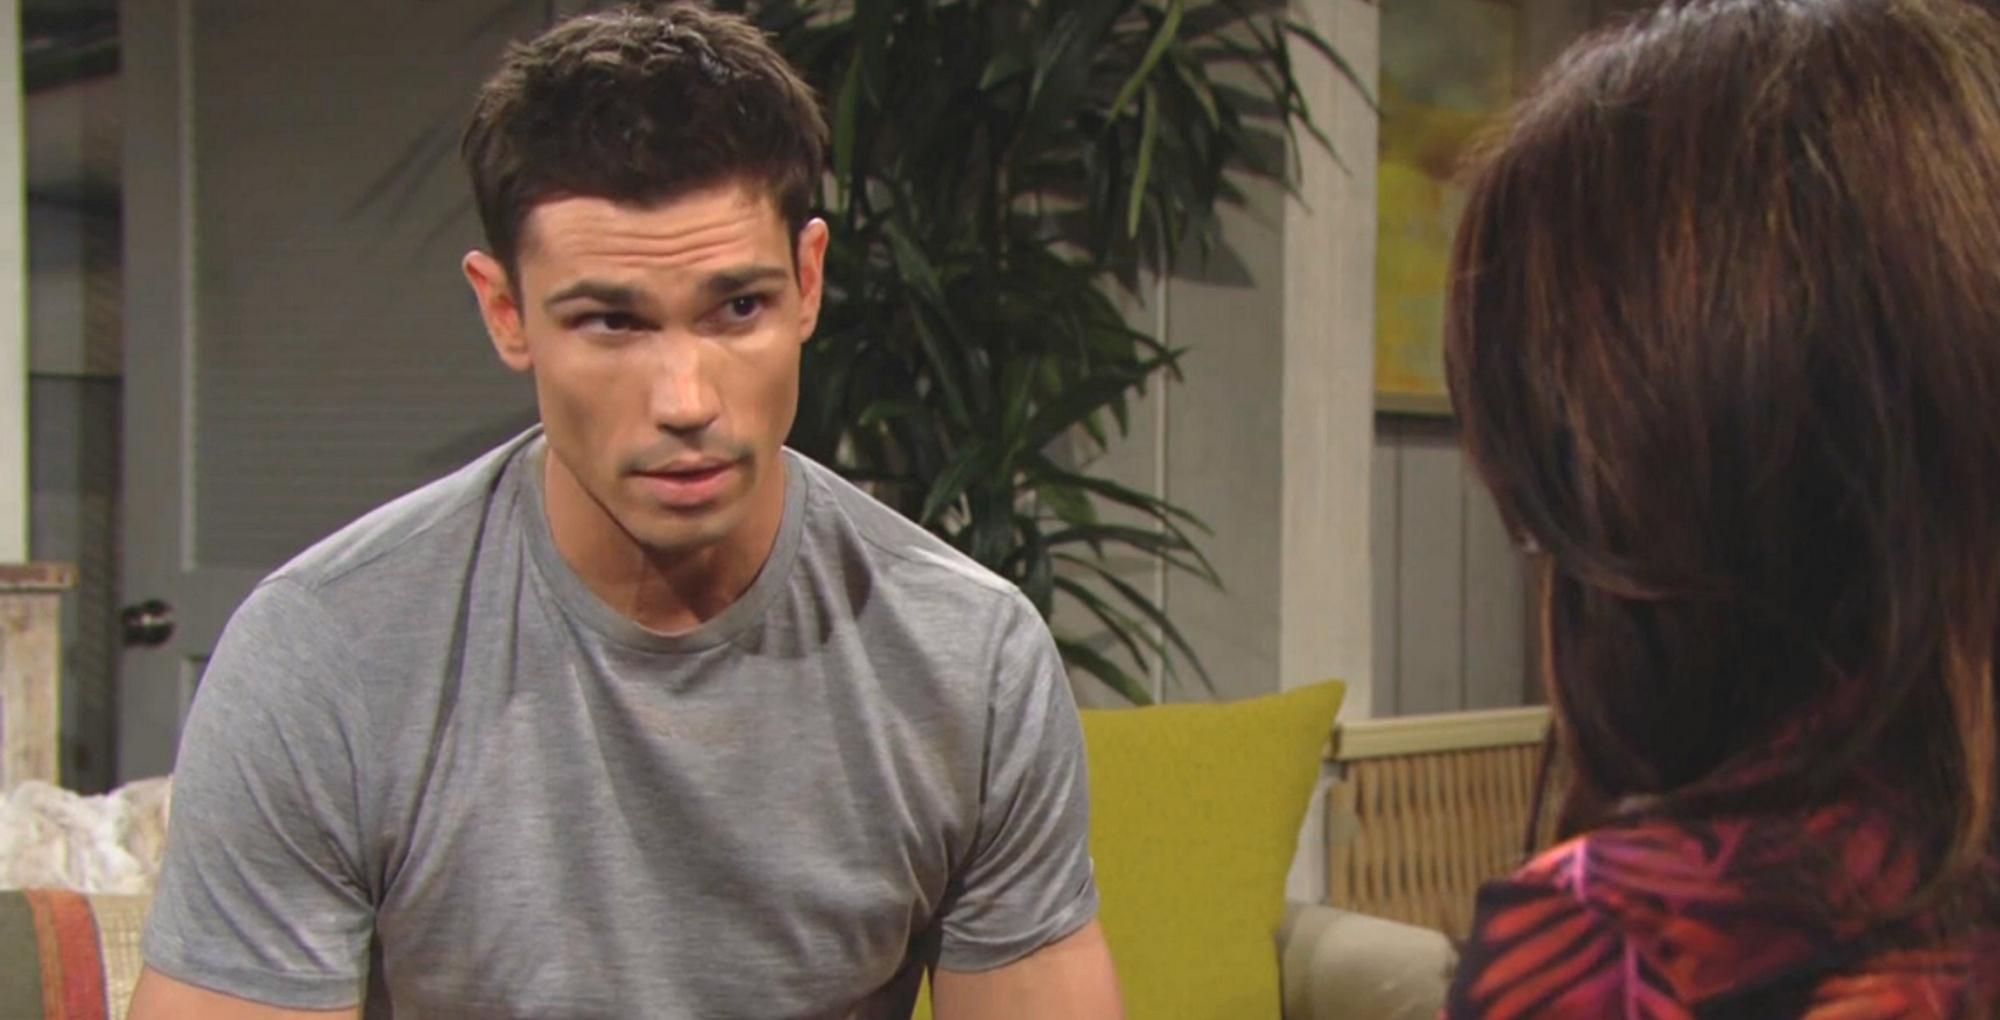 the bold and the beautiful recap for tuesday, may 9, 2023, finn finnegan sitting opposite steffy